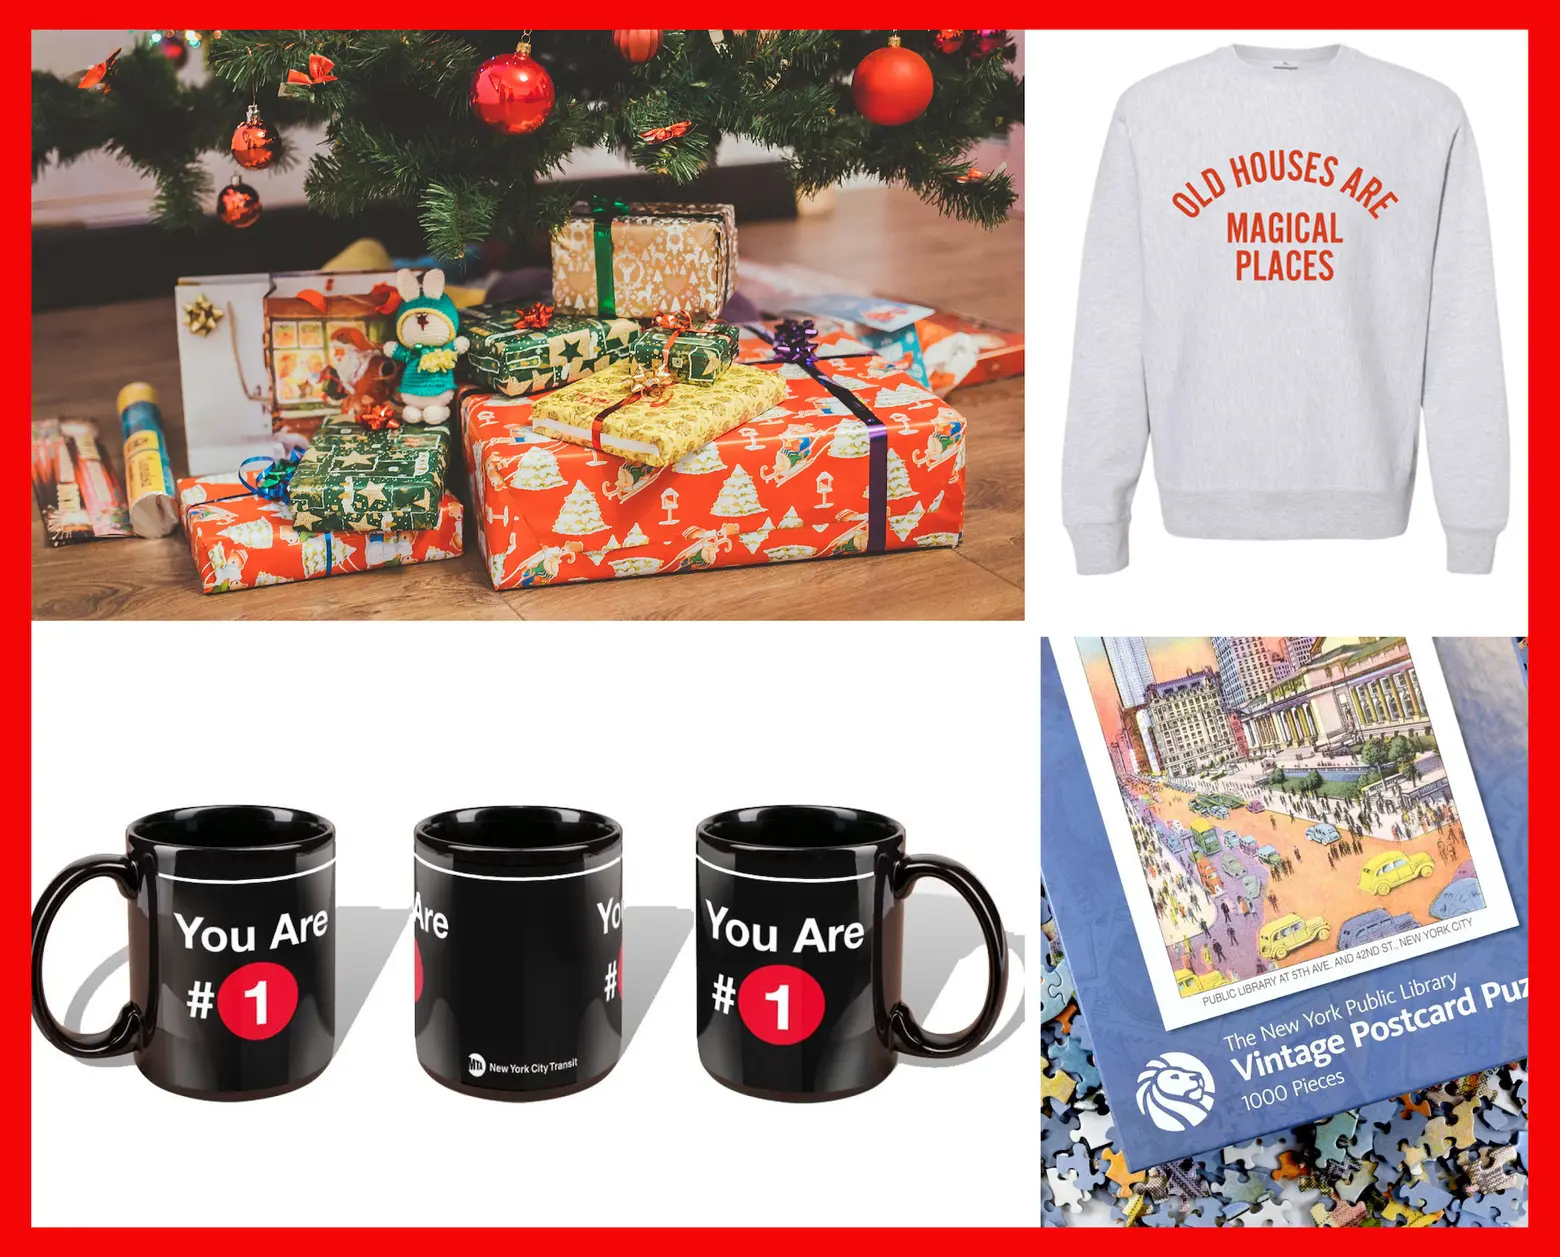 Christmas 2020: Personalised gifts for everyone on your list